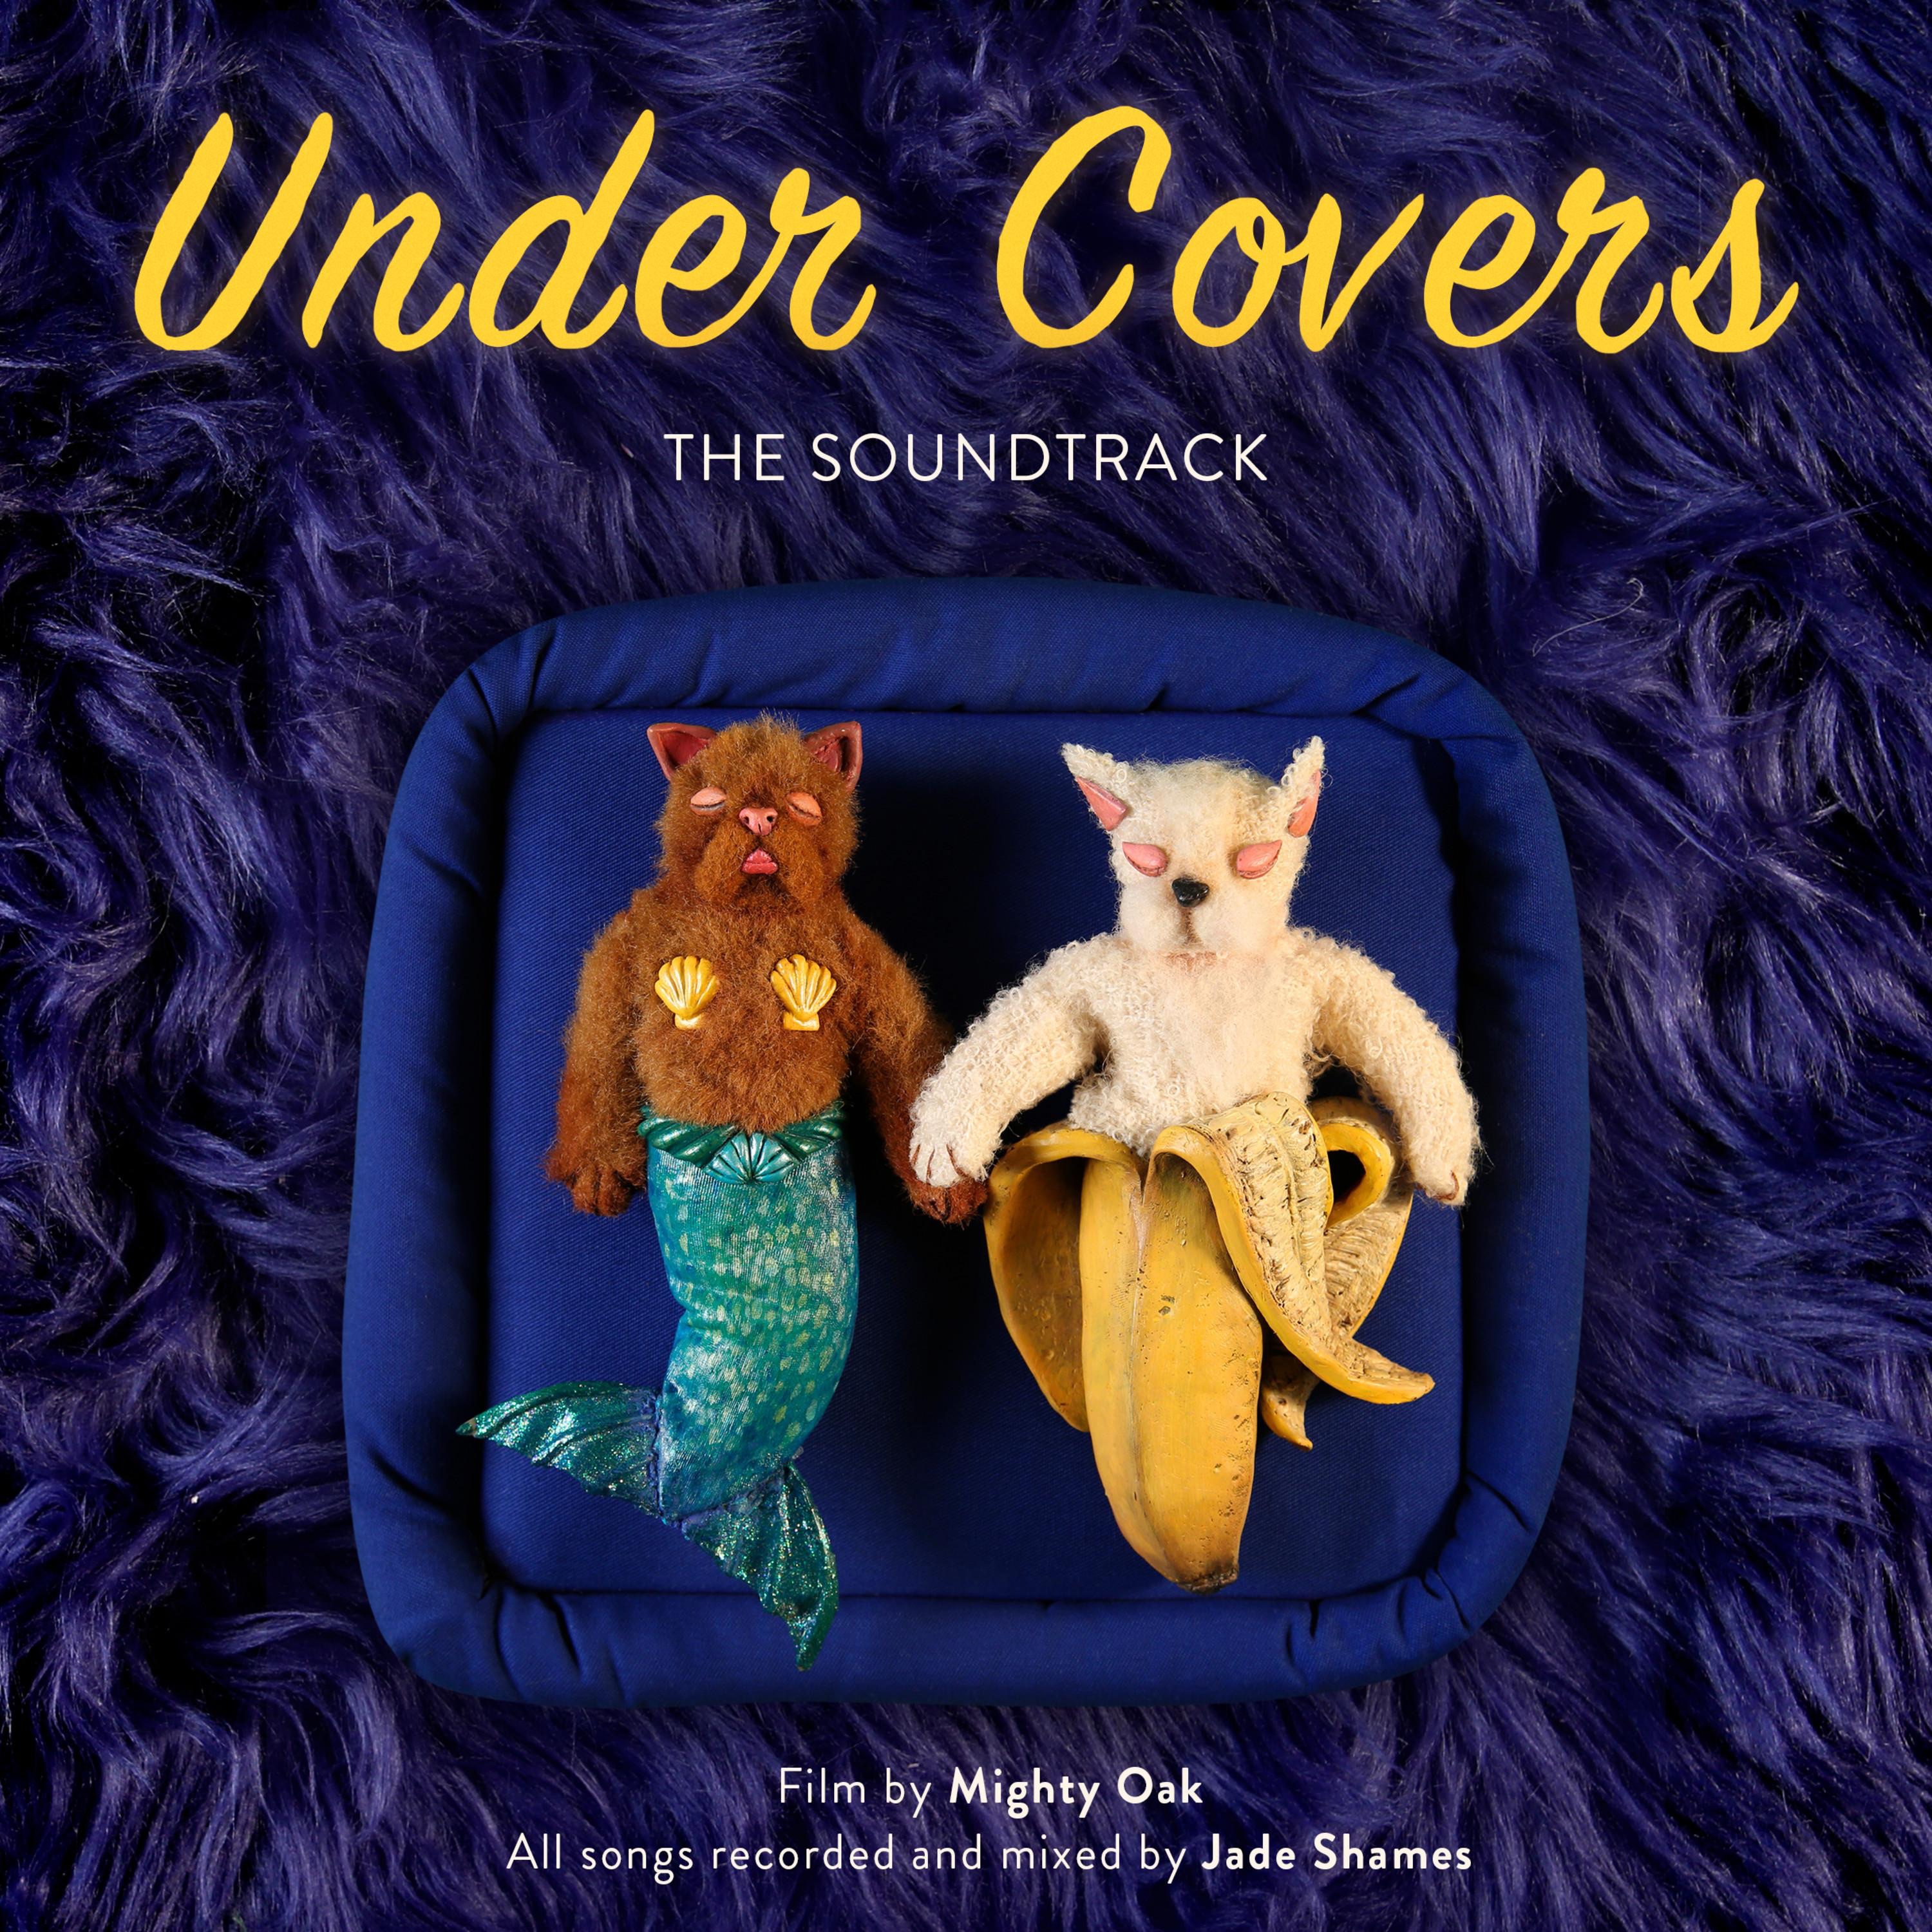 The under presents. Ghost - s.h.a.m.e. Under the Covers 2 - mastergodai. Cabinet of Curiosities (Soundtrack from the Netflix Series).